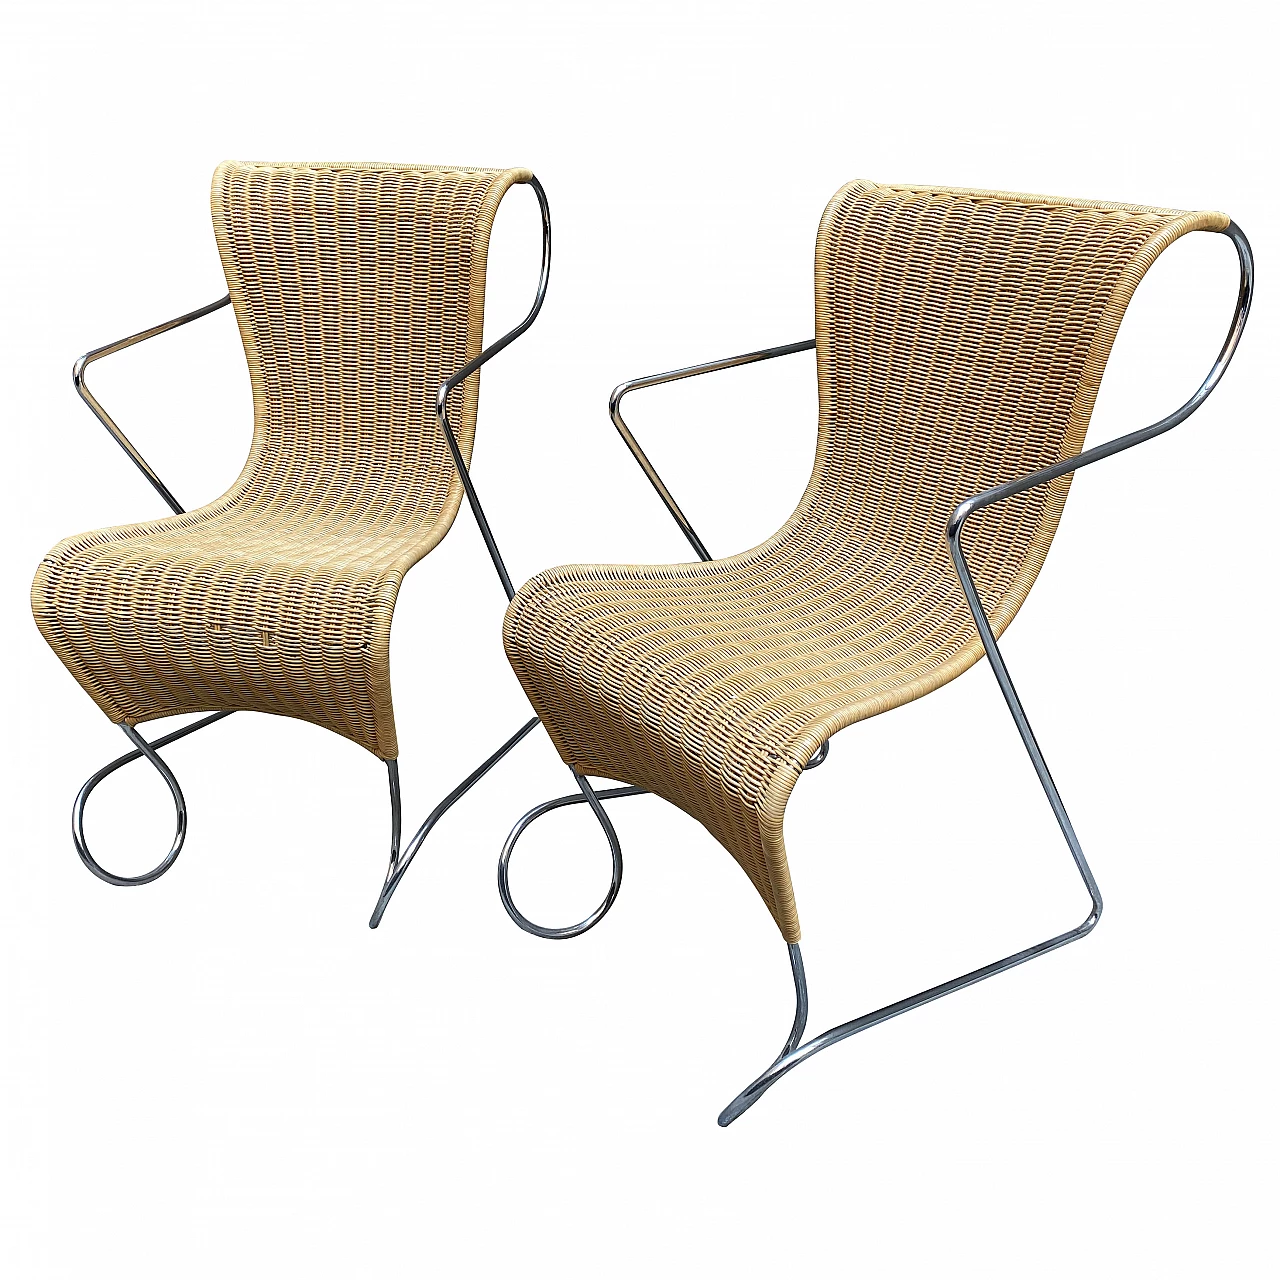 4 Zigo steel and wicker armchairs by Ron Arad for Driade, 1960s 1253691